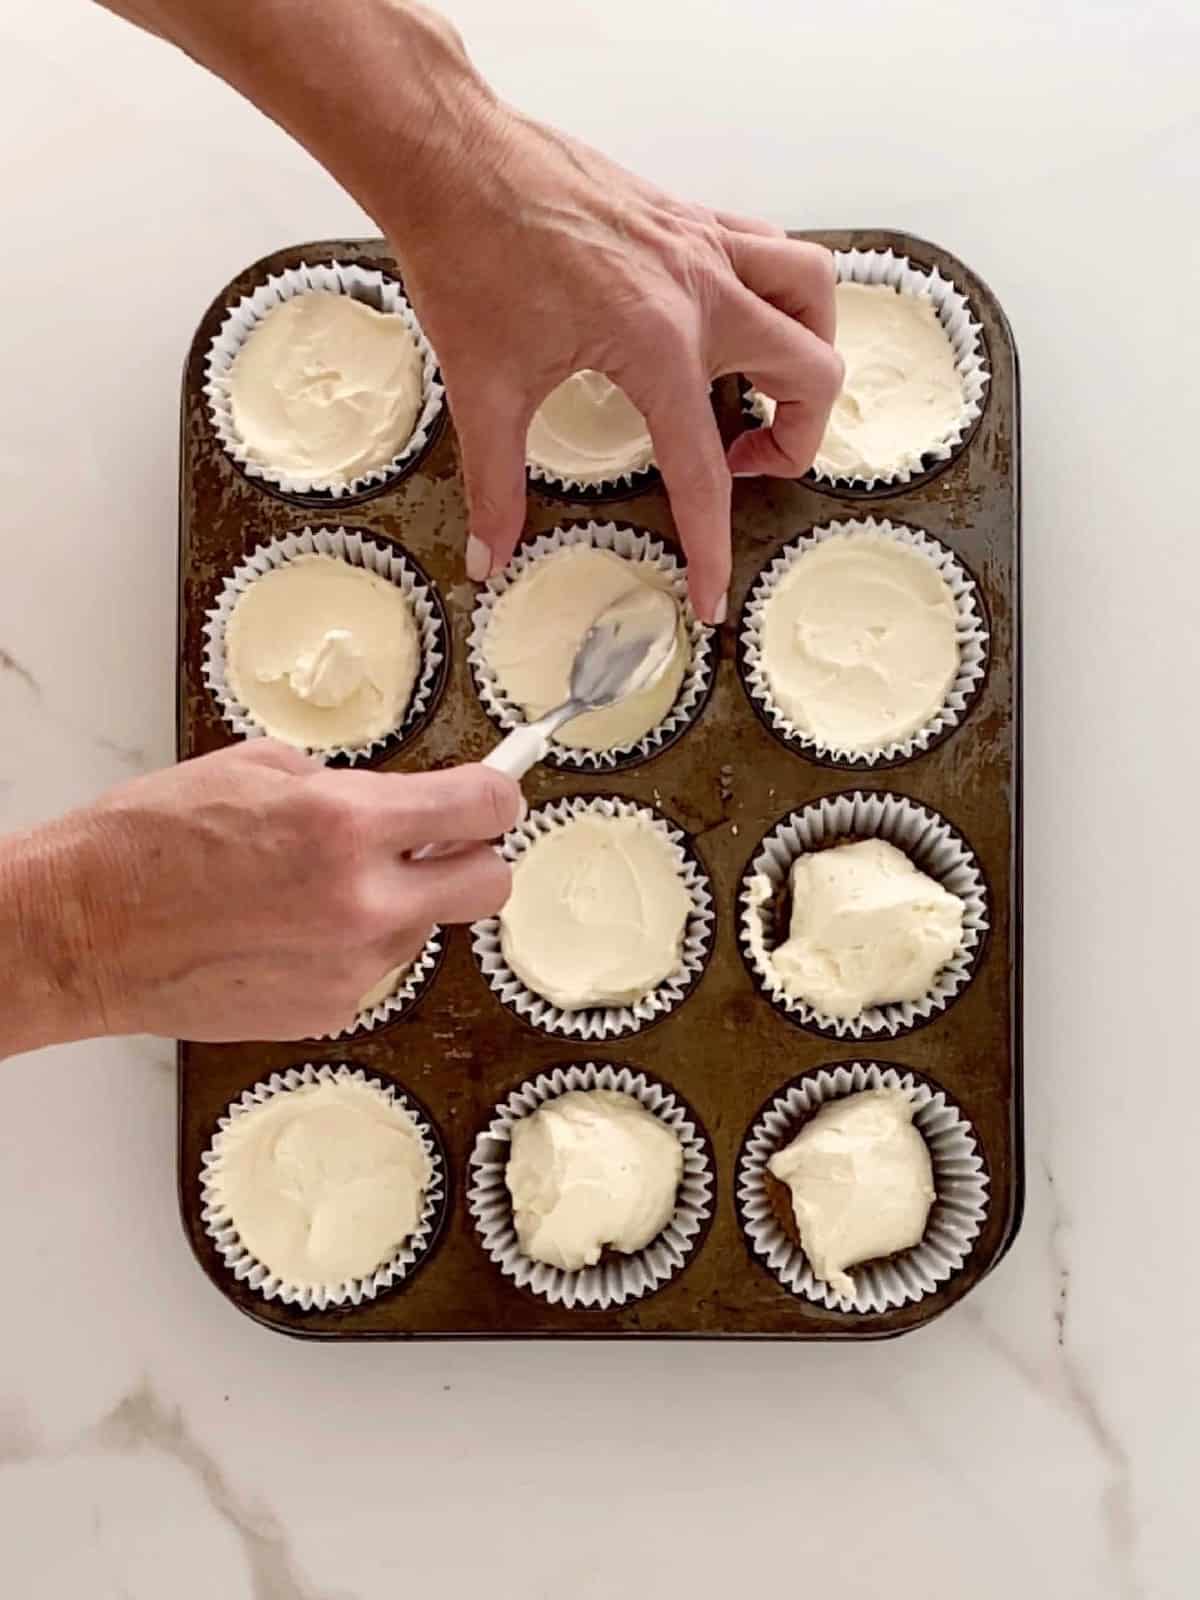 Filling paper liners in a muffin pan with no bake cheesecake. White marbled surface.